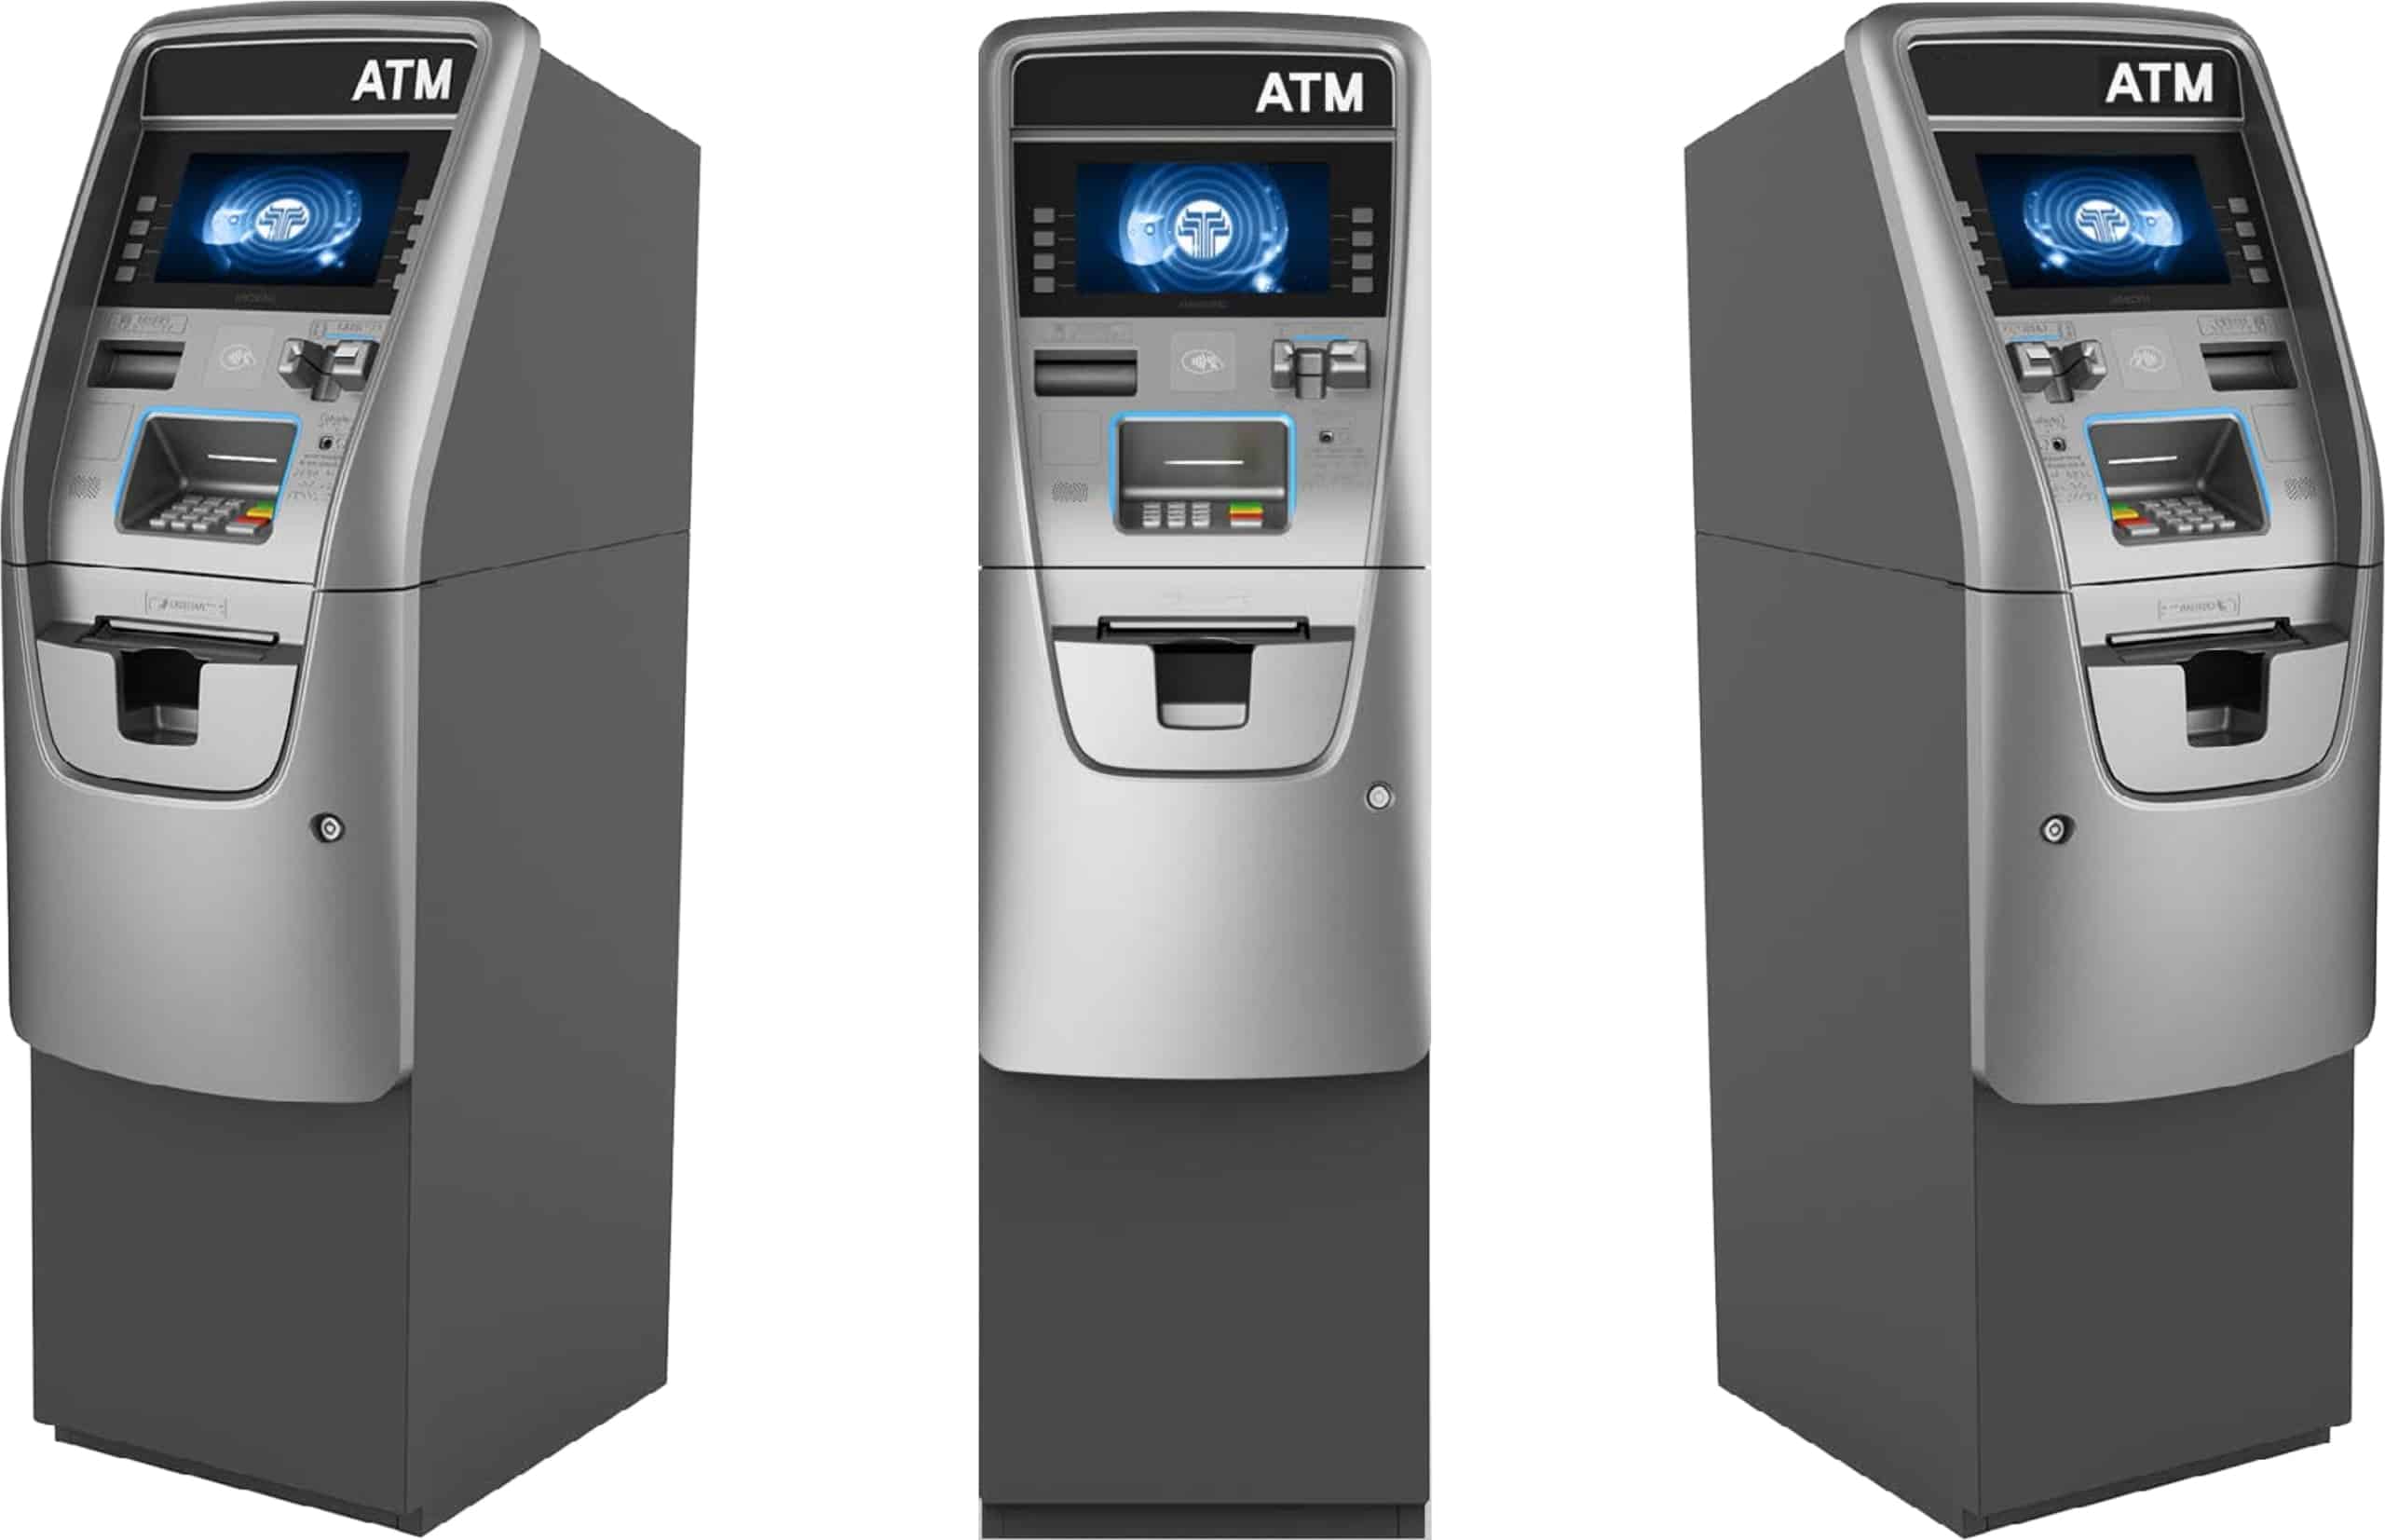 Connect ATM | Buy ATM Machines | Start ATM Business